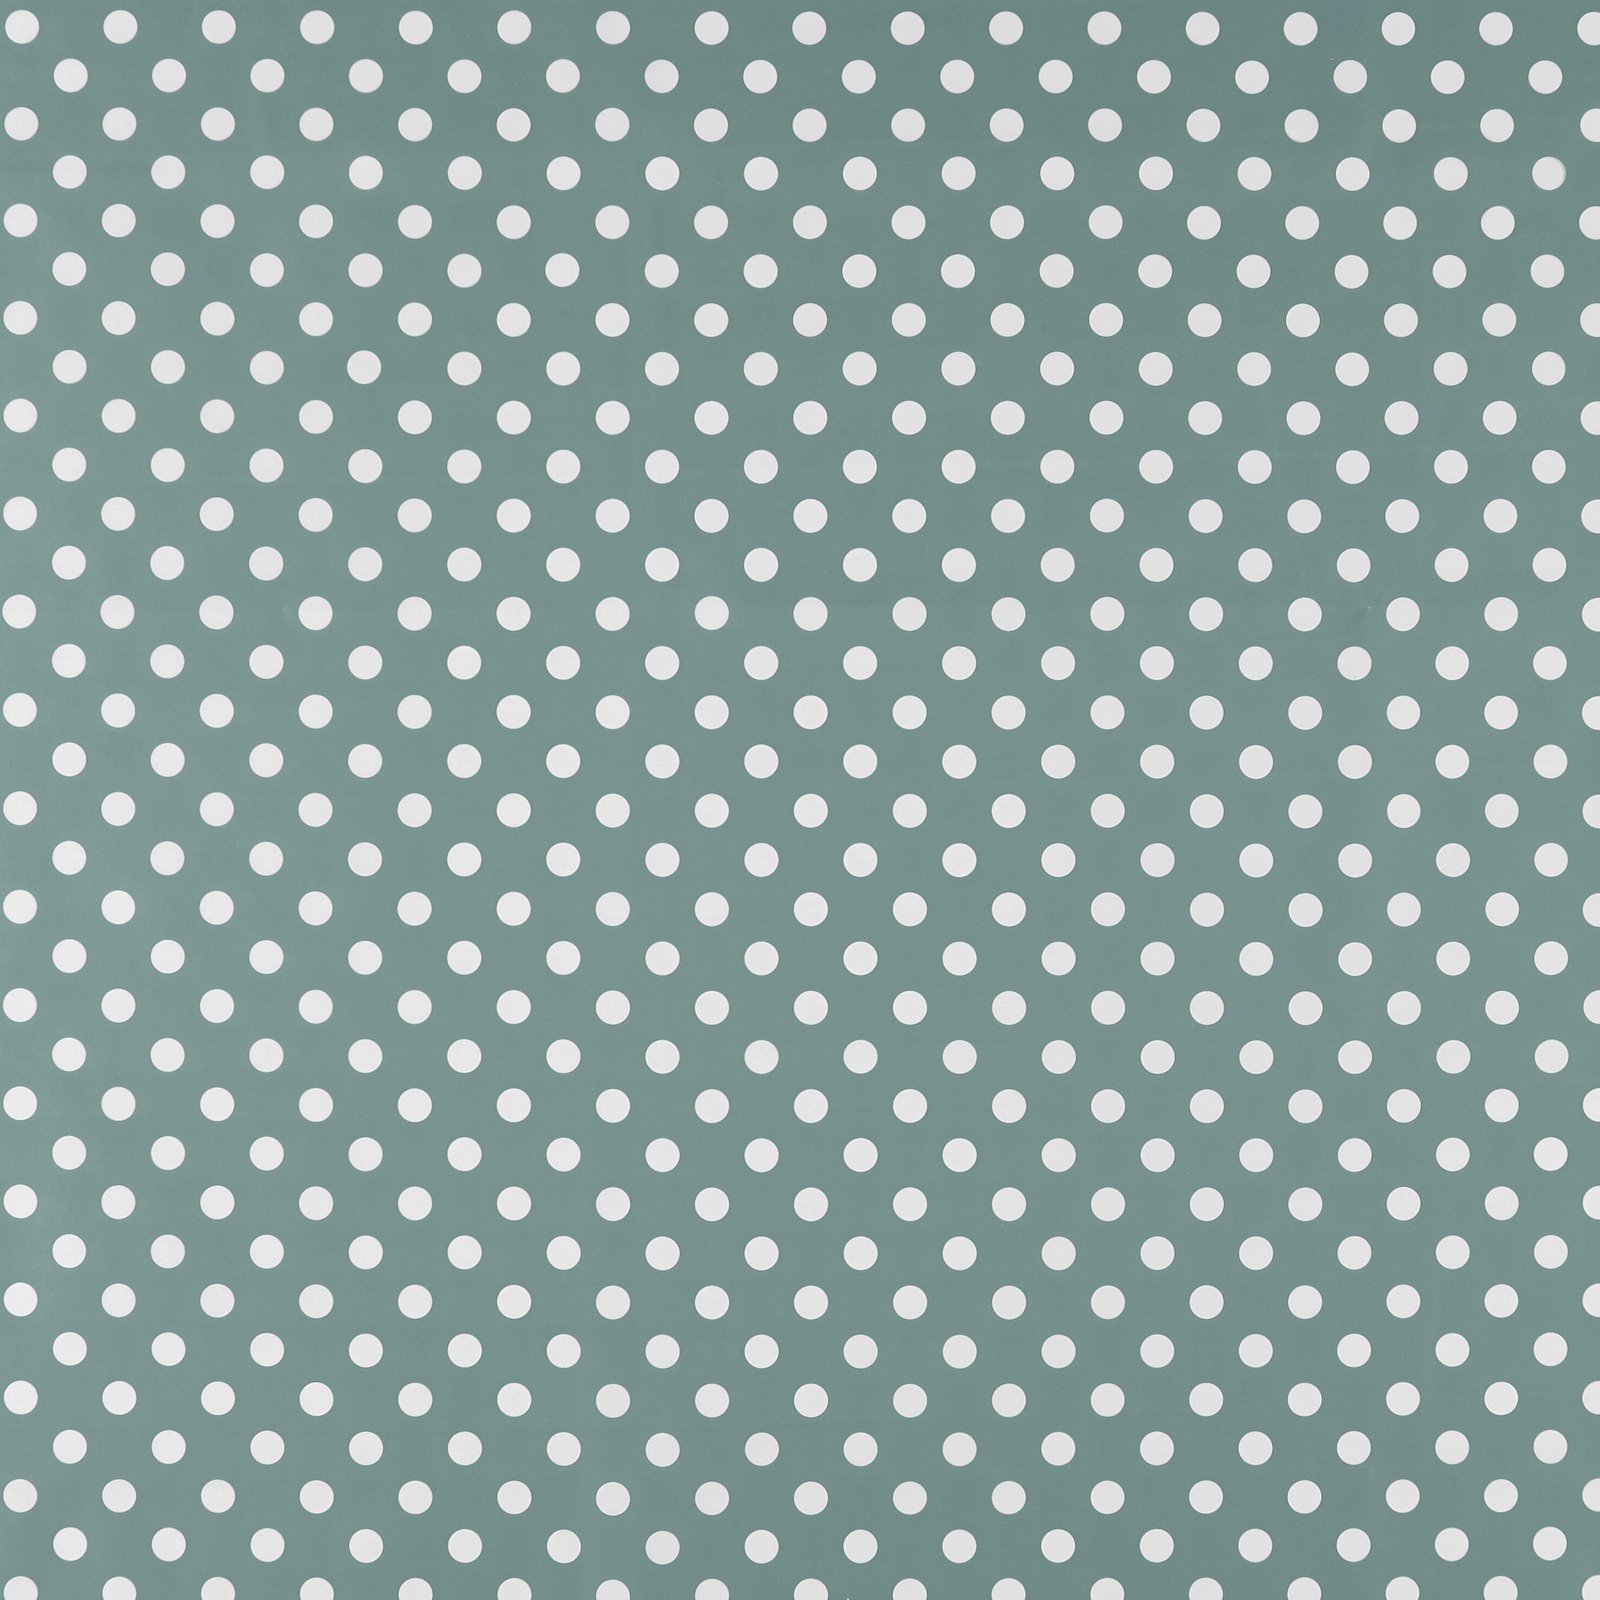 Non-woven oilcloth ds blue w white dots 861570_pack_sp